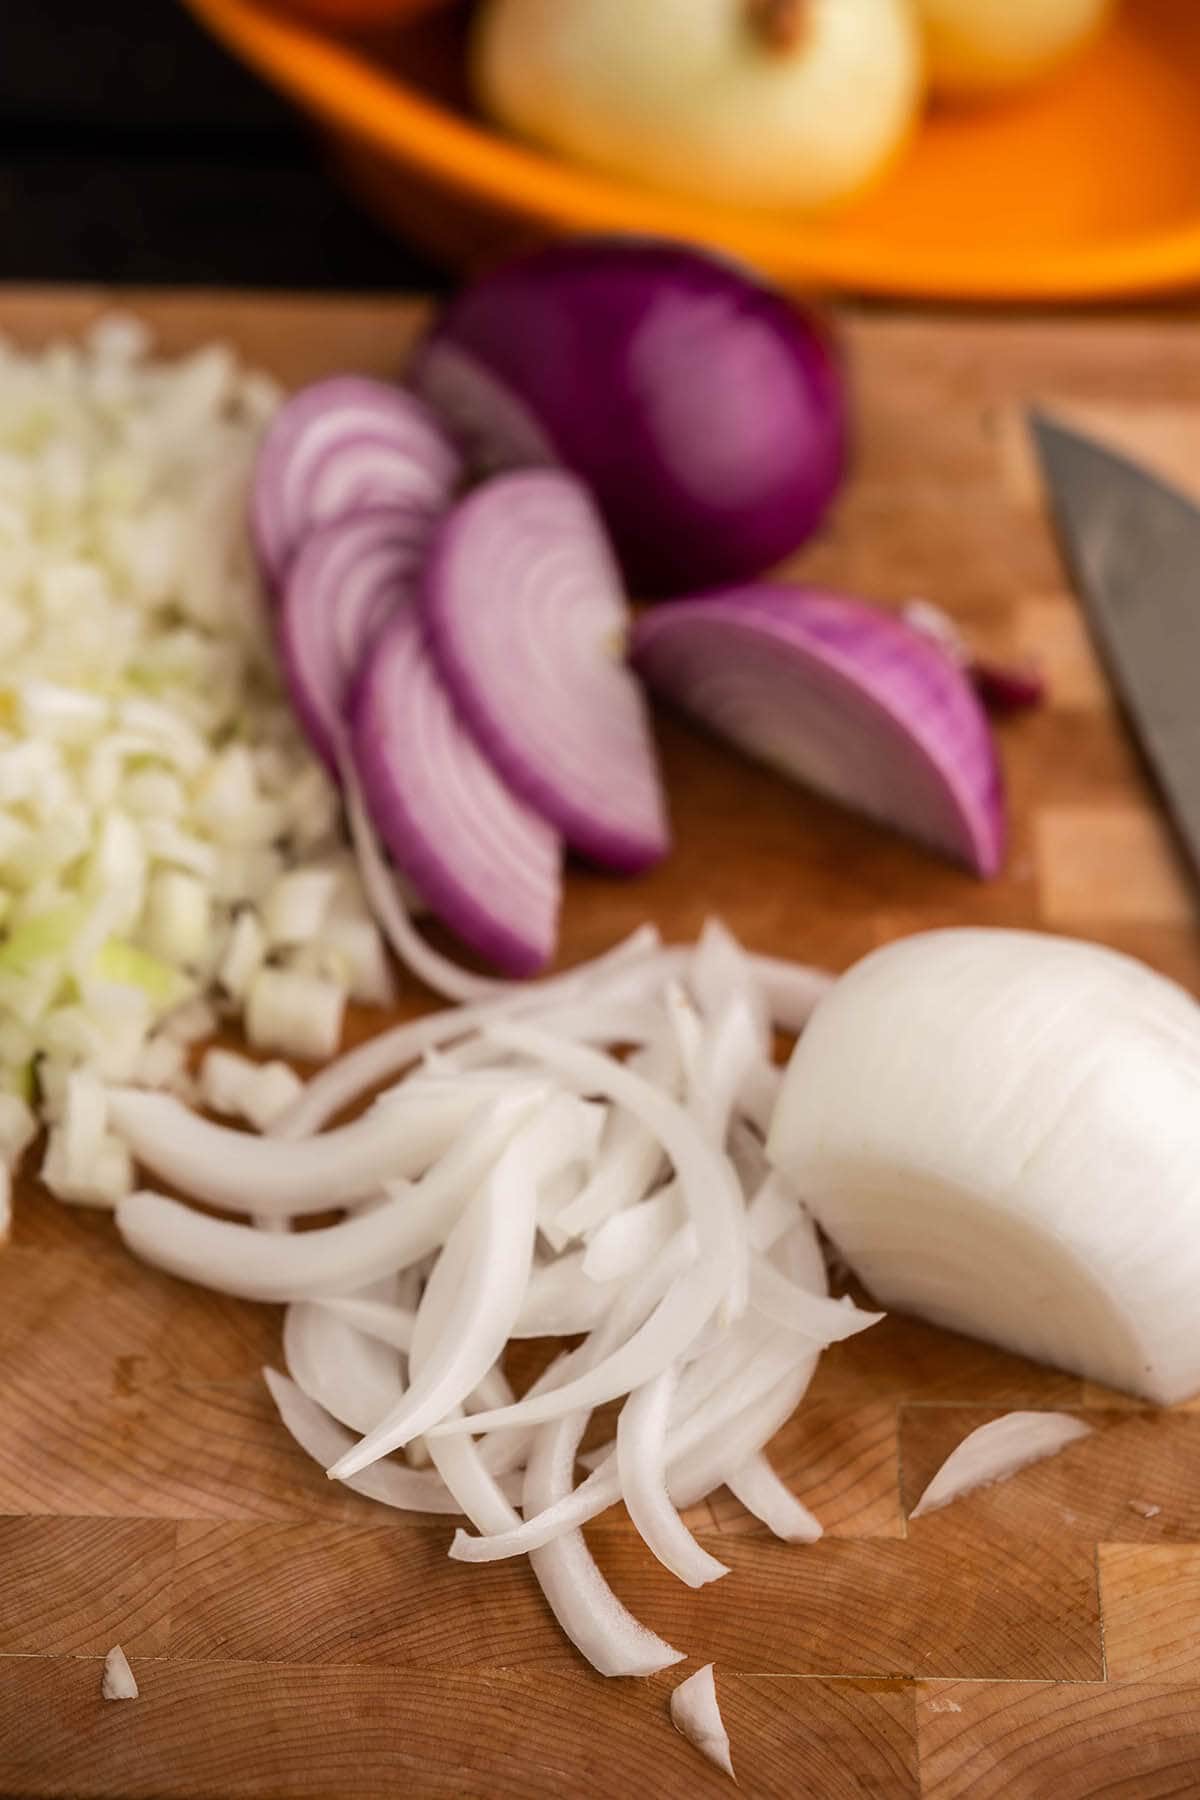 Slivered onions on cutting board.